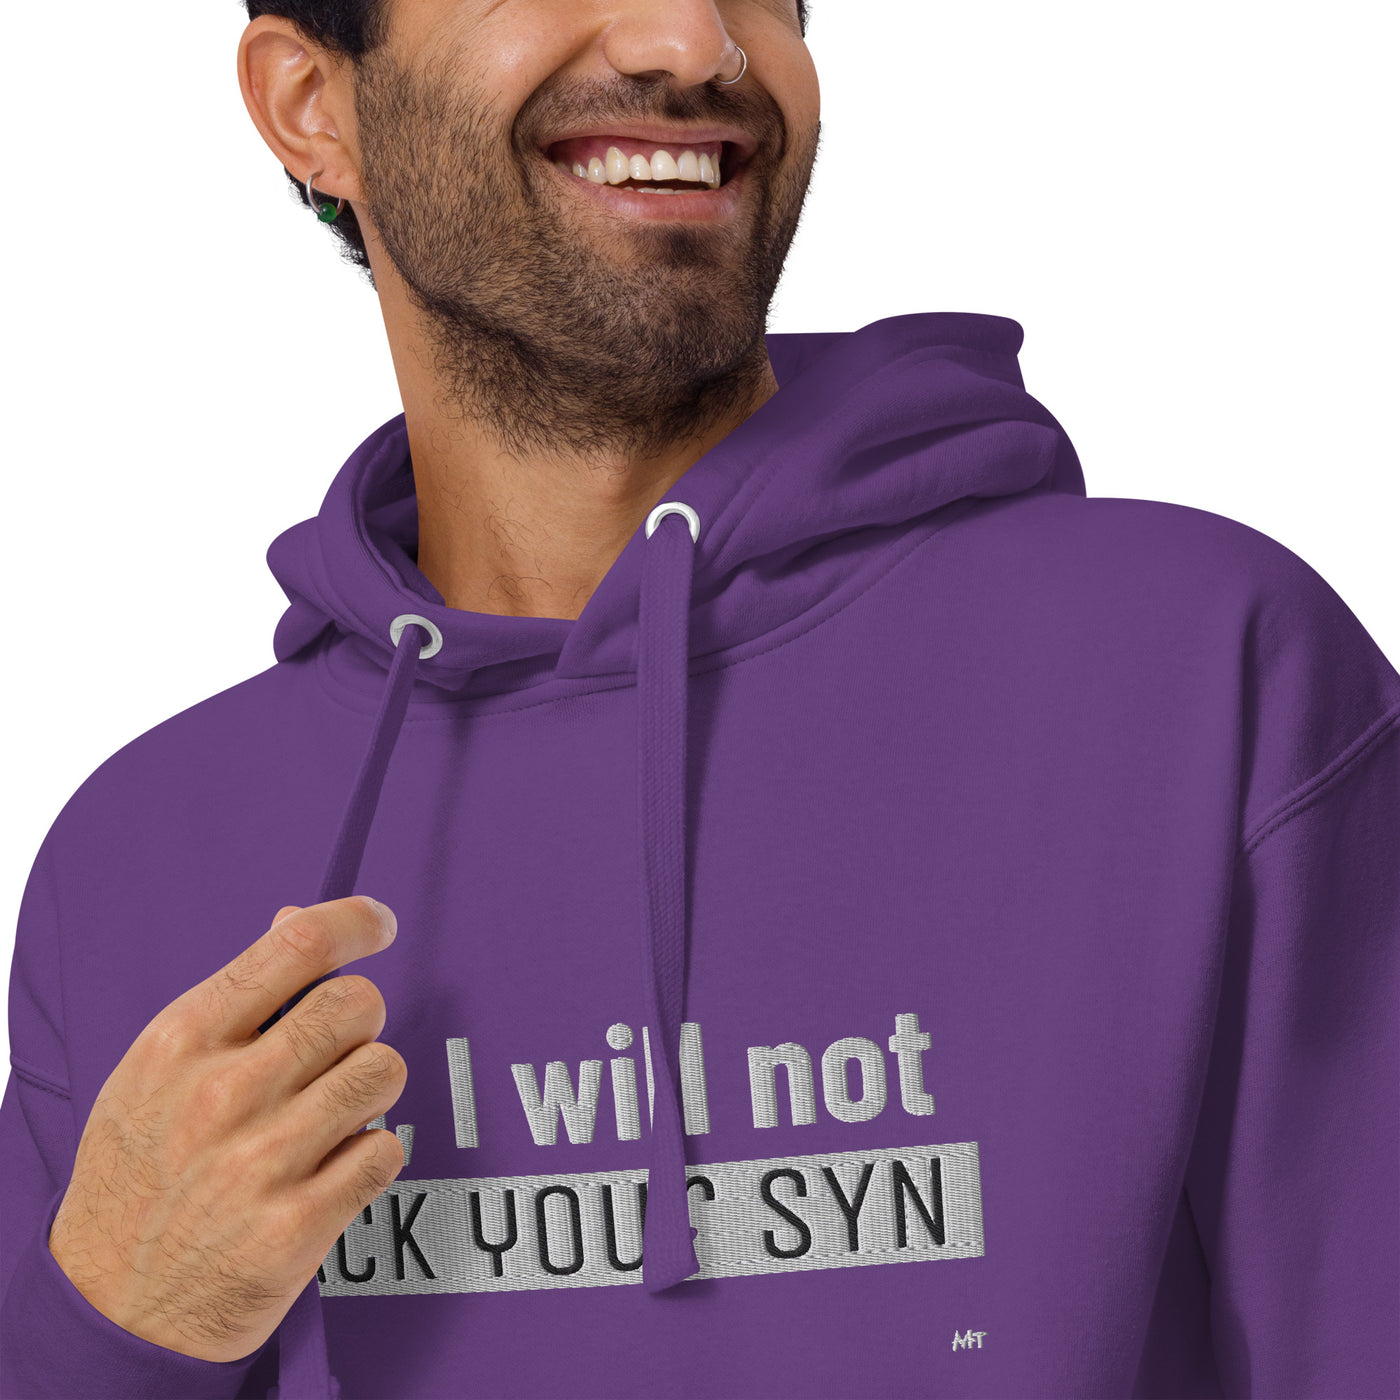 No I will not ack your sin - Unisex Hoodie (embroidered)